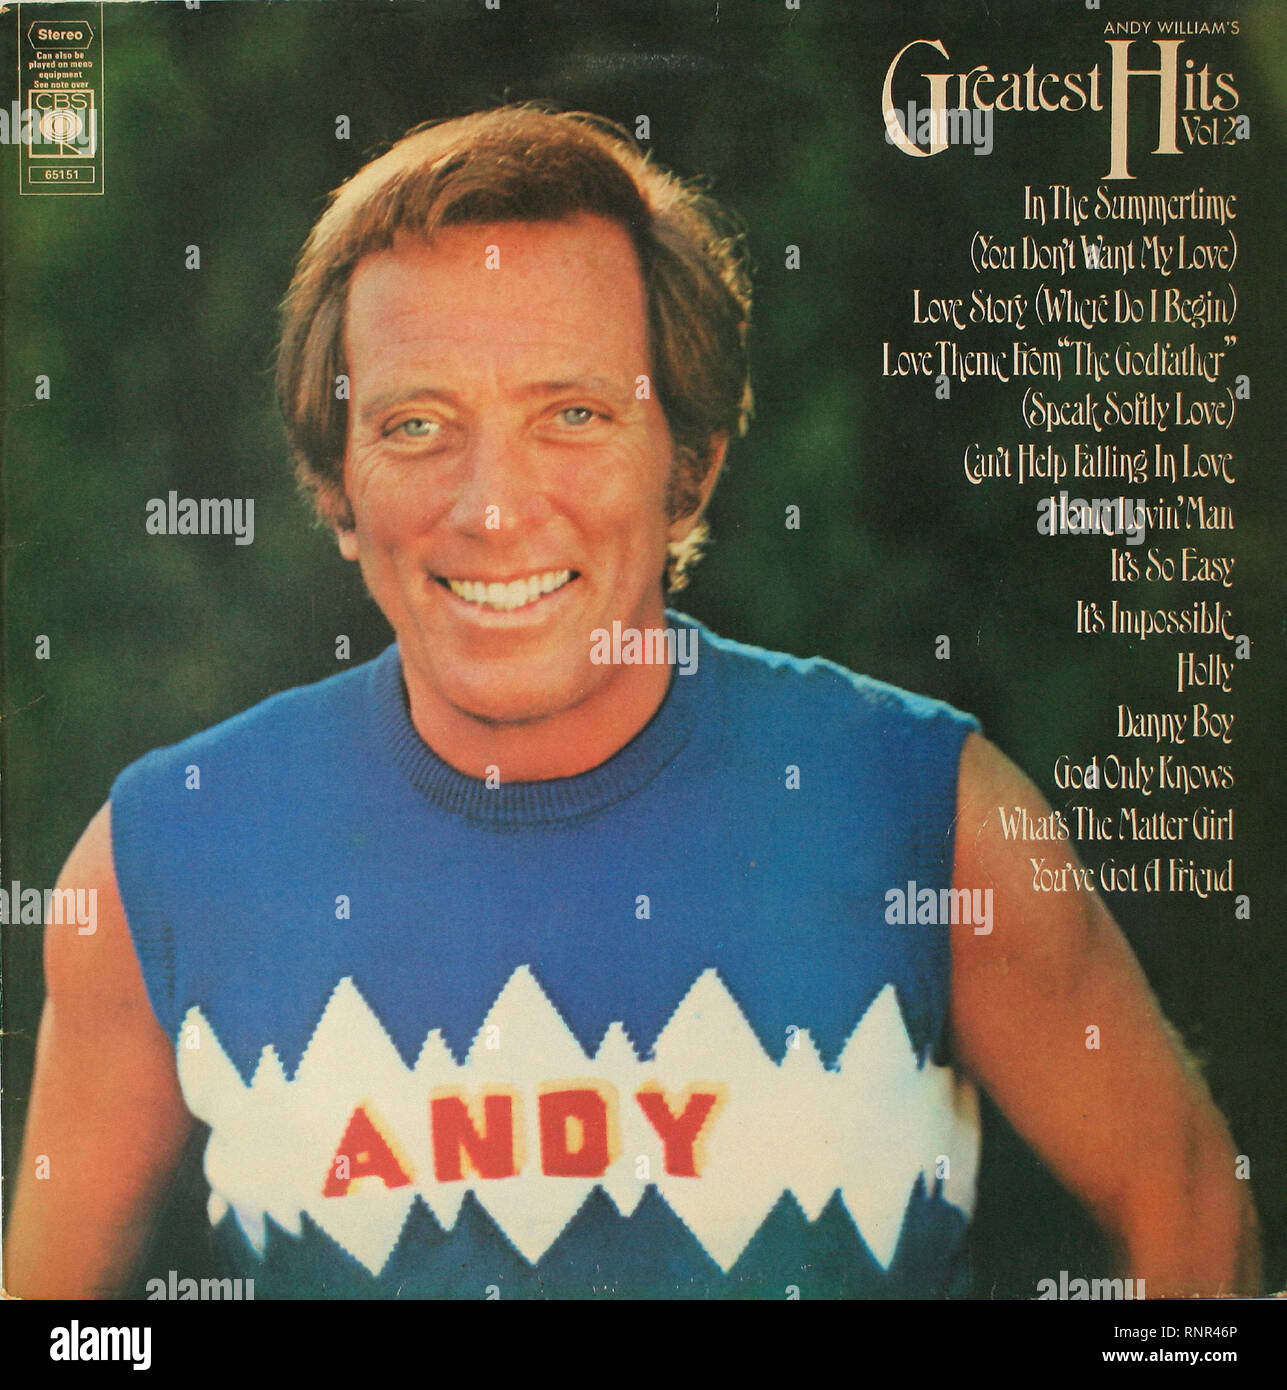 Andy Williams Greatest Hits Vol2 - Vintage Cover Album Stock Photo